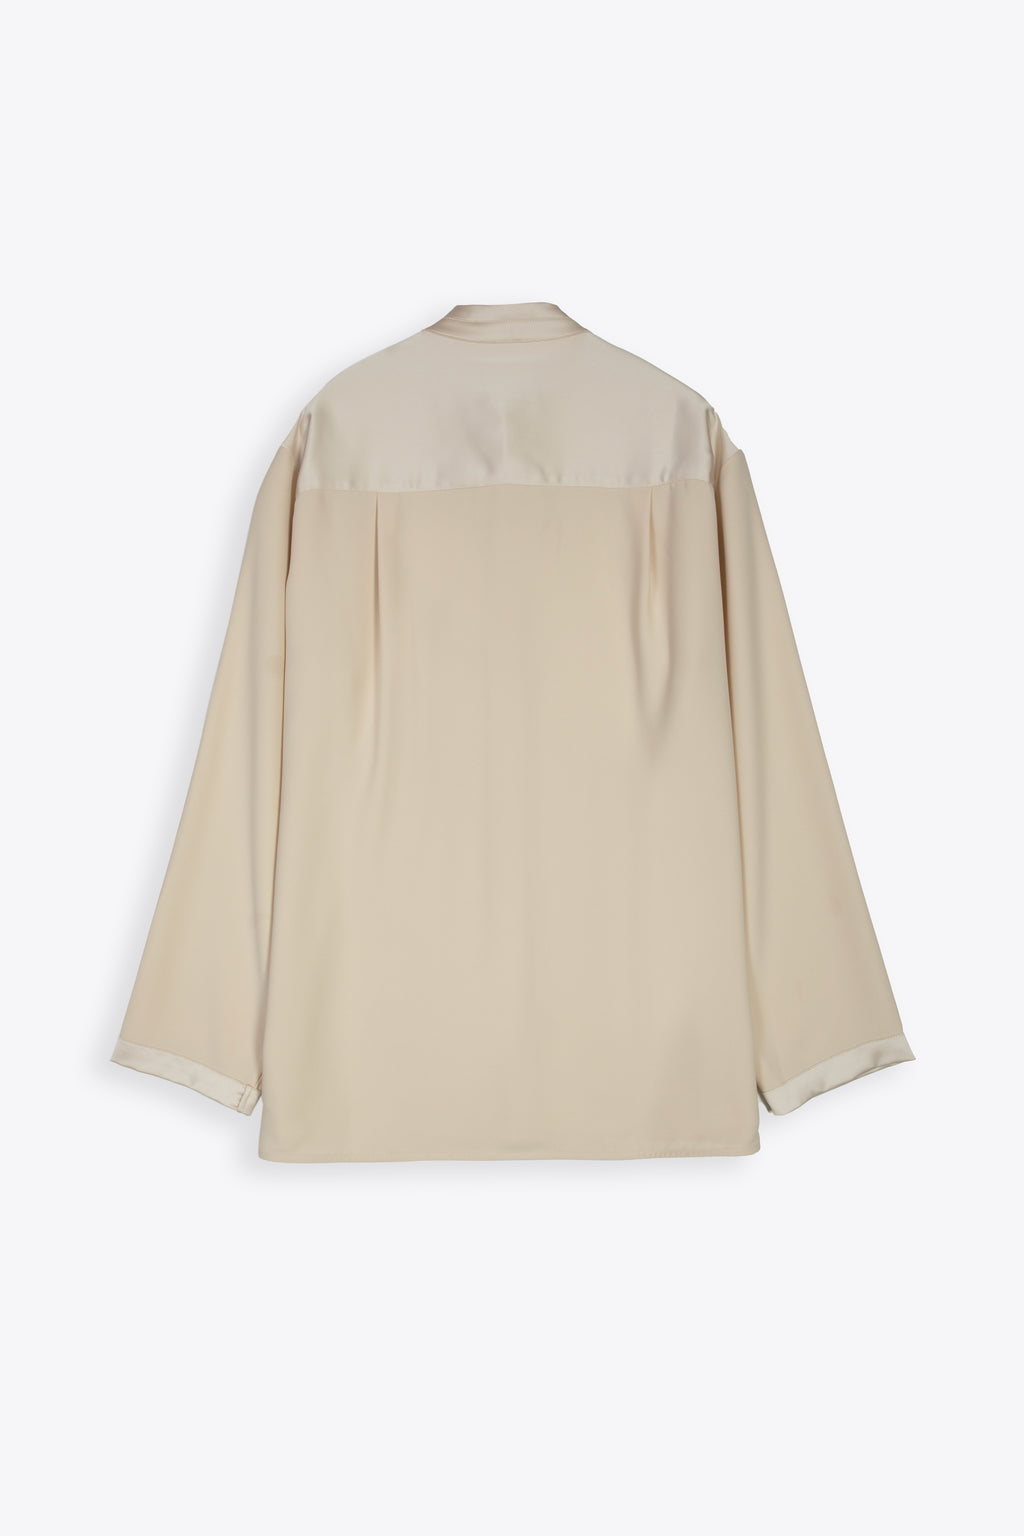 alt-image__Champagne-coloured-satin-korean-shirt-with-long-sleeves-